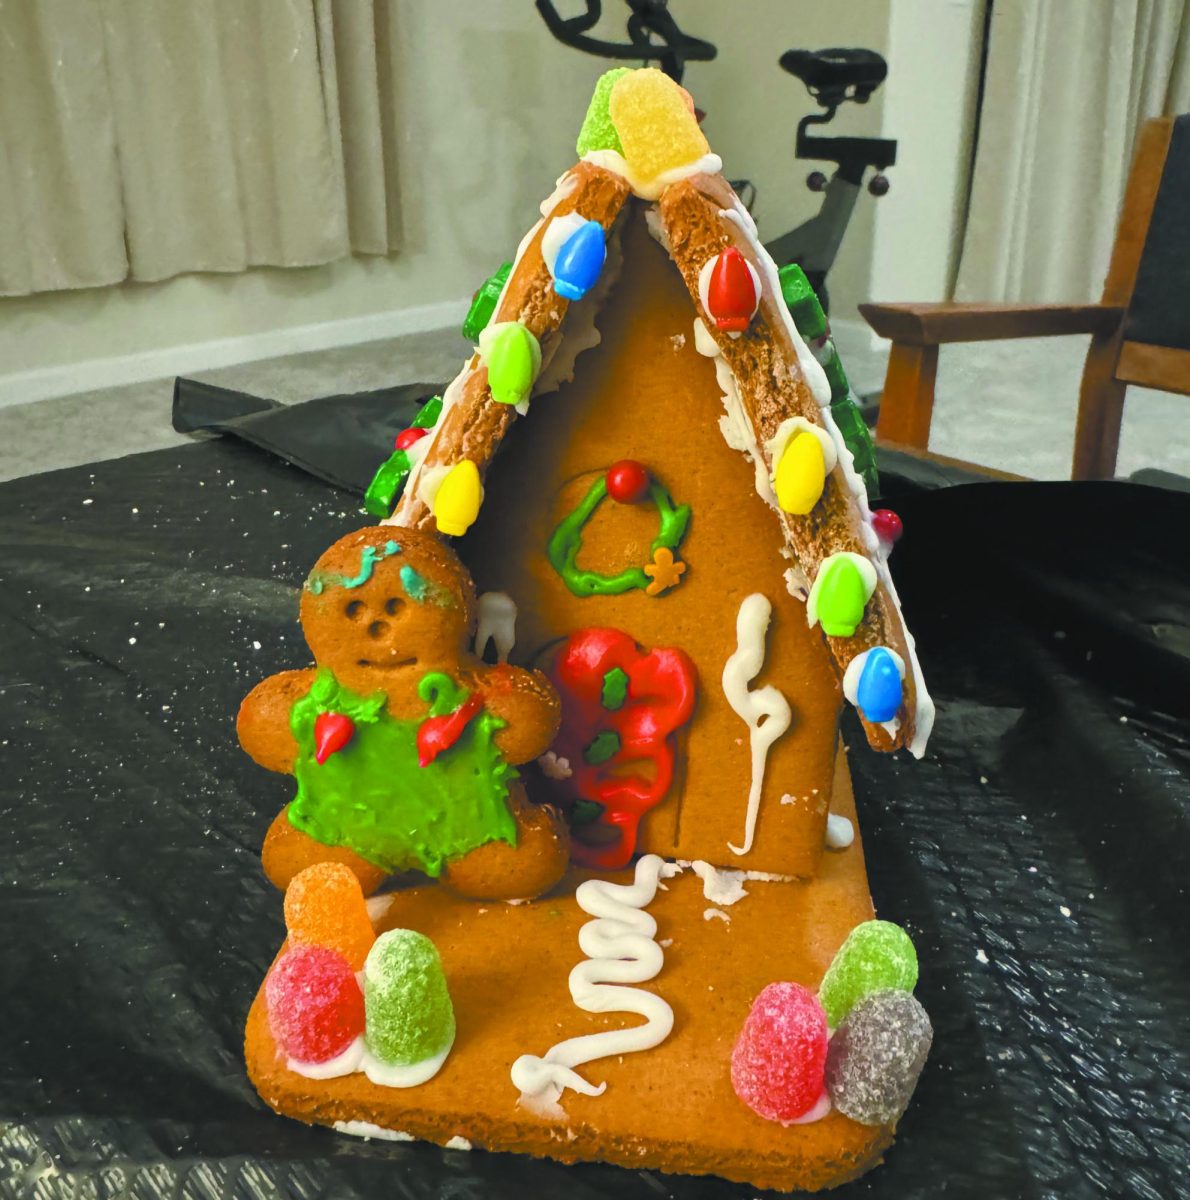 Don%E2%80%99t+fall+off.+While+precarious%2C+sophomore+Brianna+Yang%E2%80%99s+finished+gingerbread+house+stayed+standing+up.+She+said+that+creating+a+gingerbread+house+with+no+expertise+is+harder+than+it+looks.+%E2%80%9CI+underestimated+the+process.+A+very+humbling+experience%2C%E2%80%9D+Yang+said.+